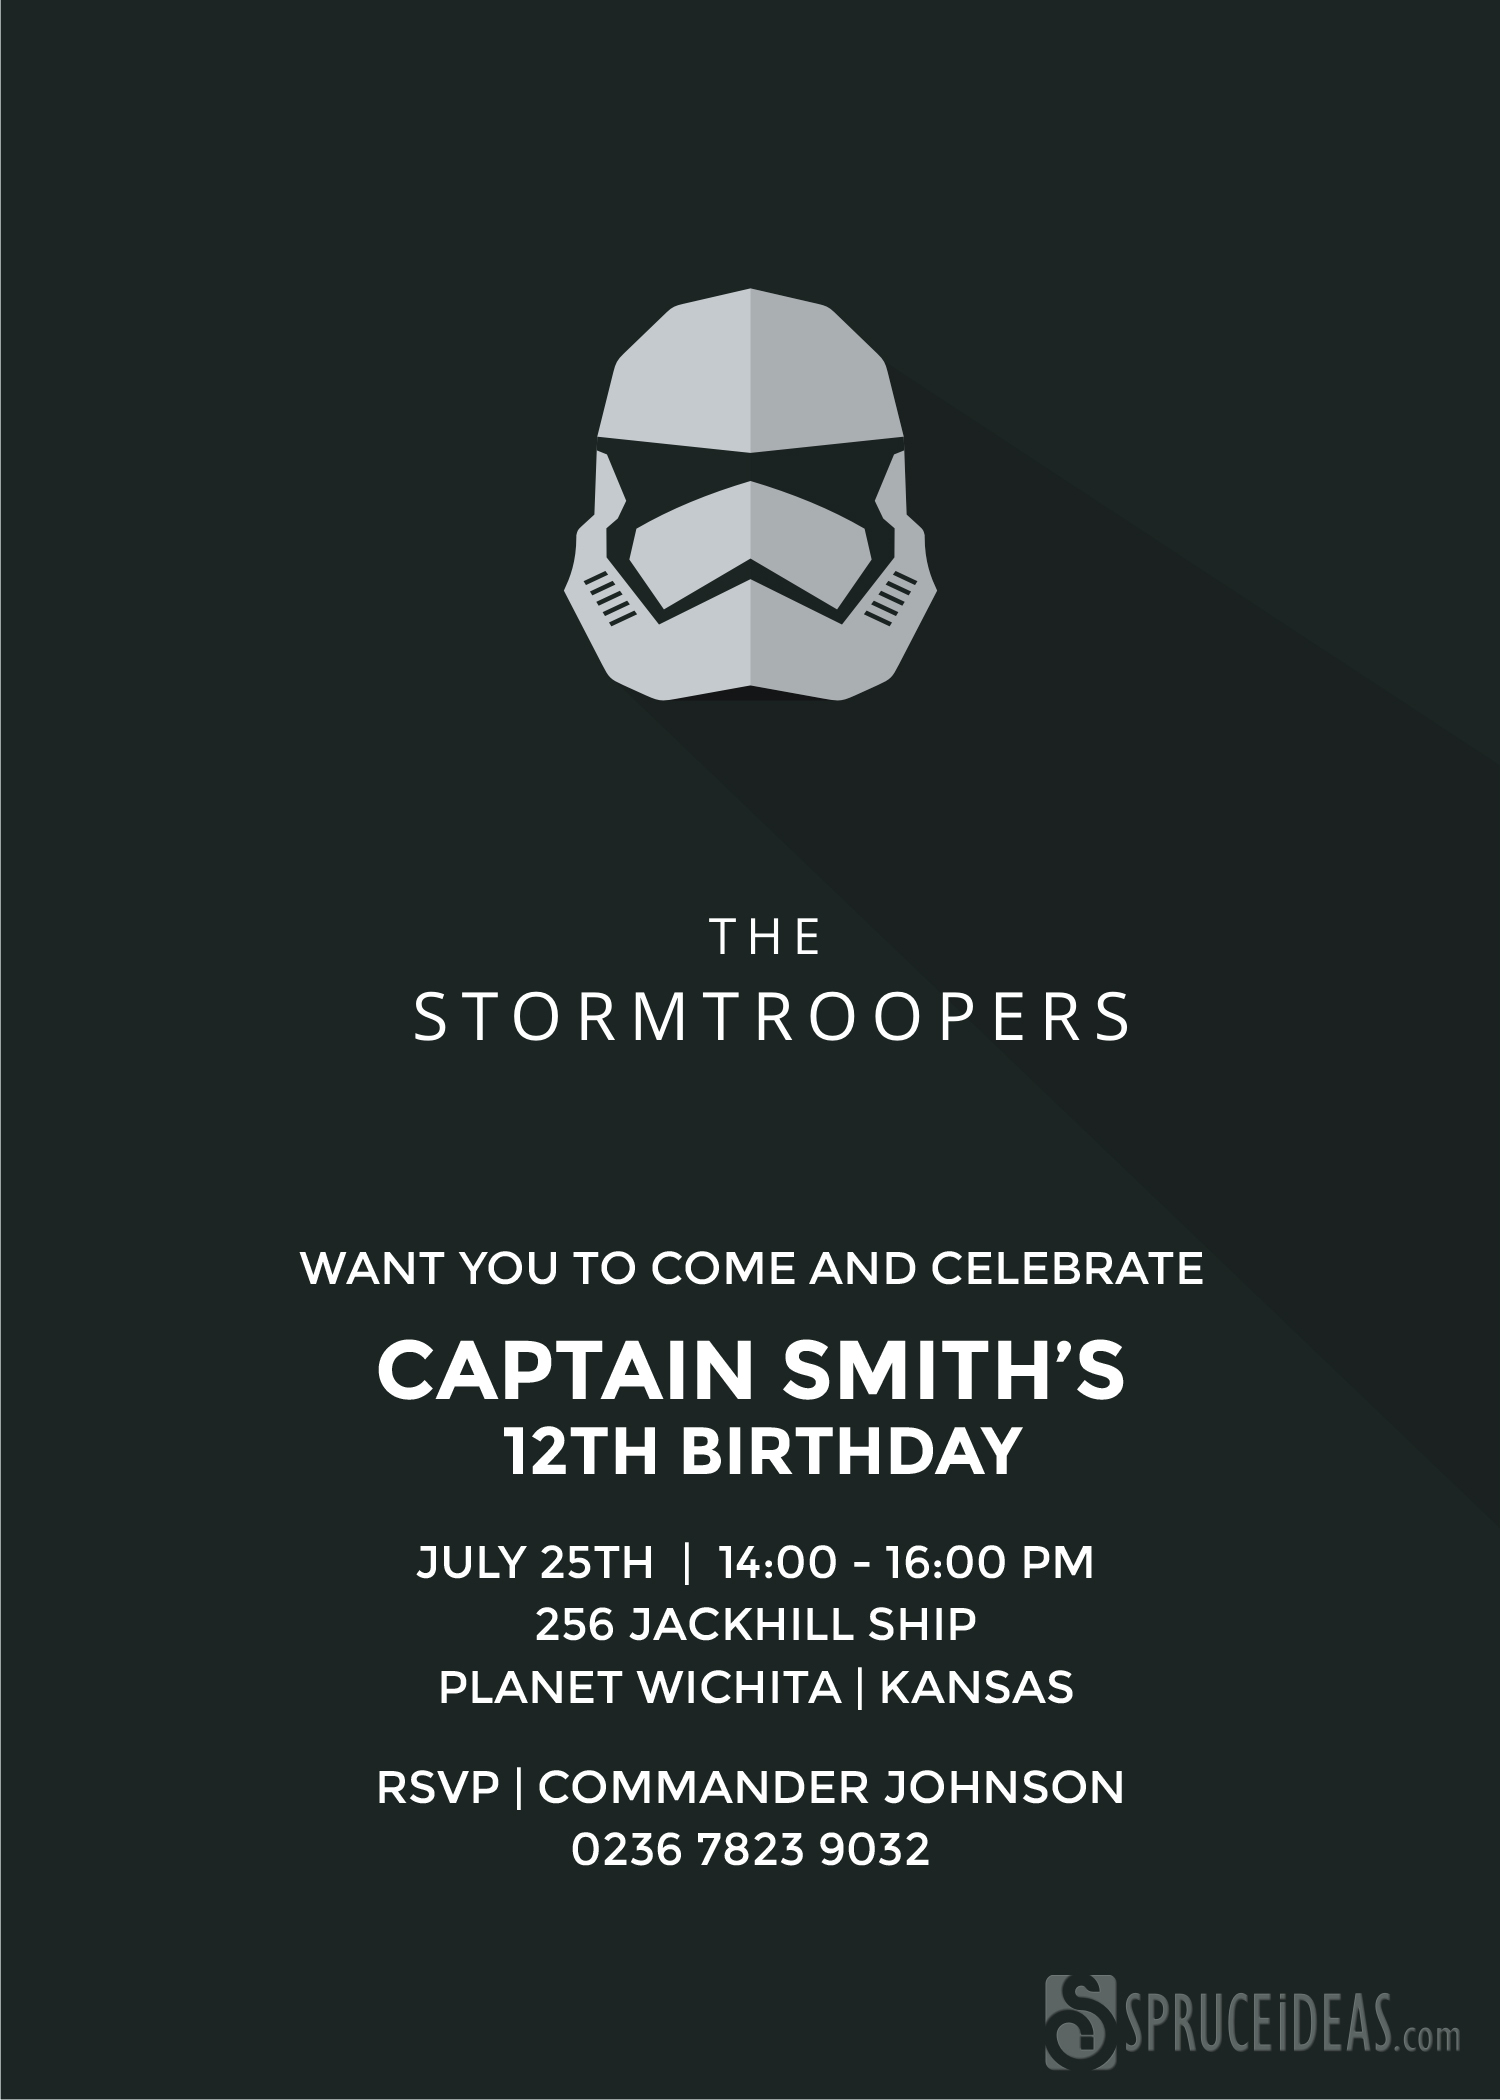 010 Star Wars Stormtrooper Birthday Invitation Template Printable intended for proportions 1500 X 2100